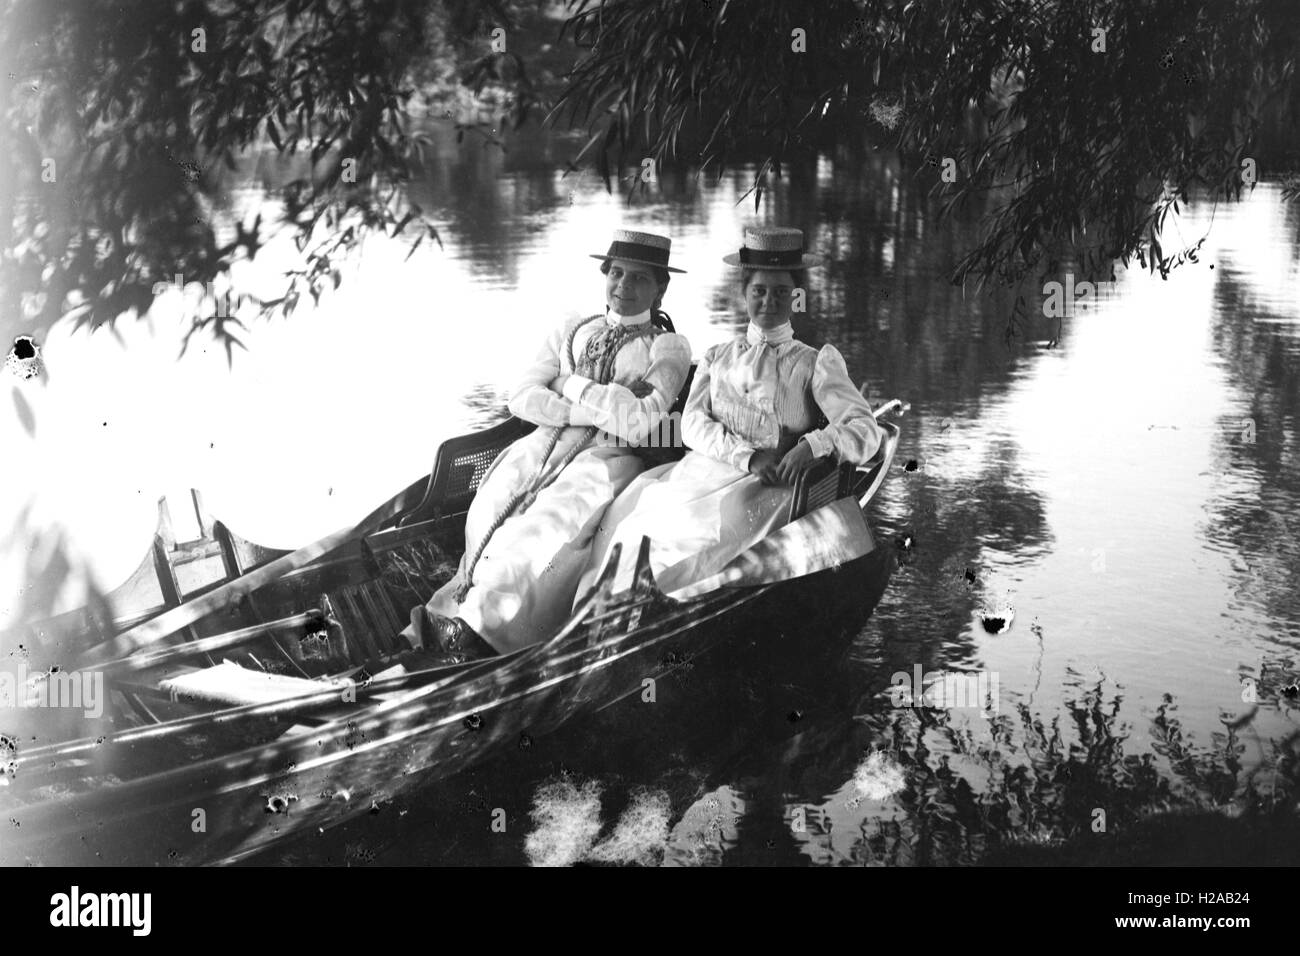 Two women pose on a rowing boat on a river c1900. Photo by Tony Henshaw Stock Photo